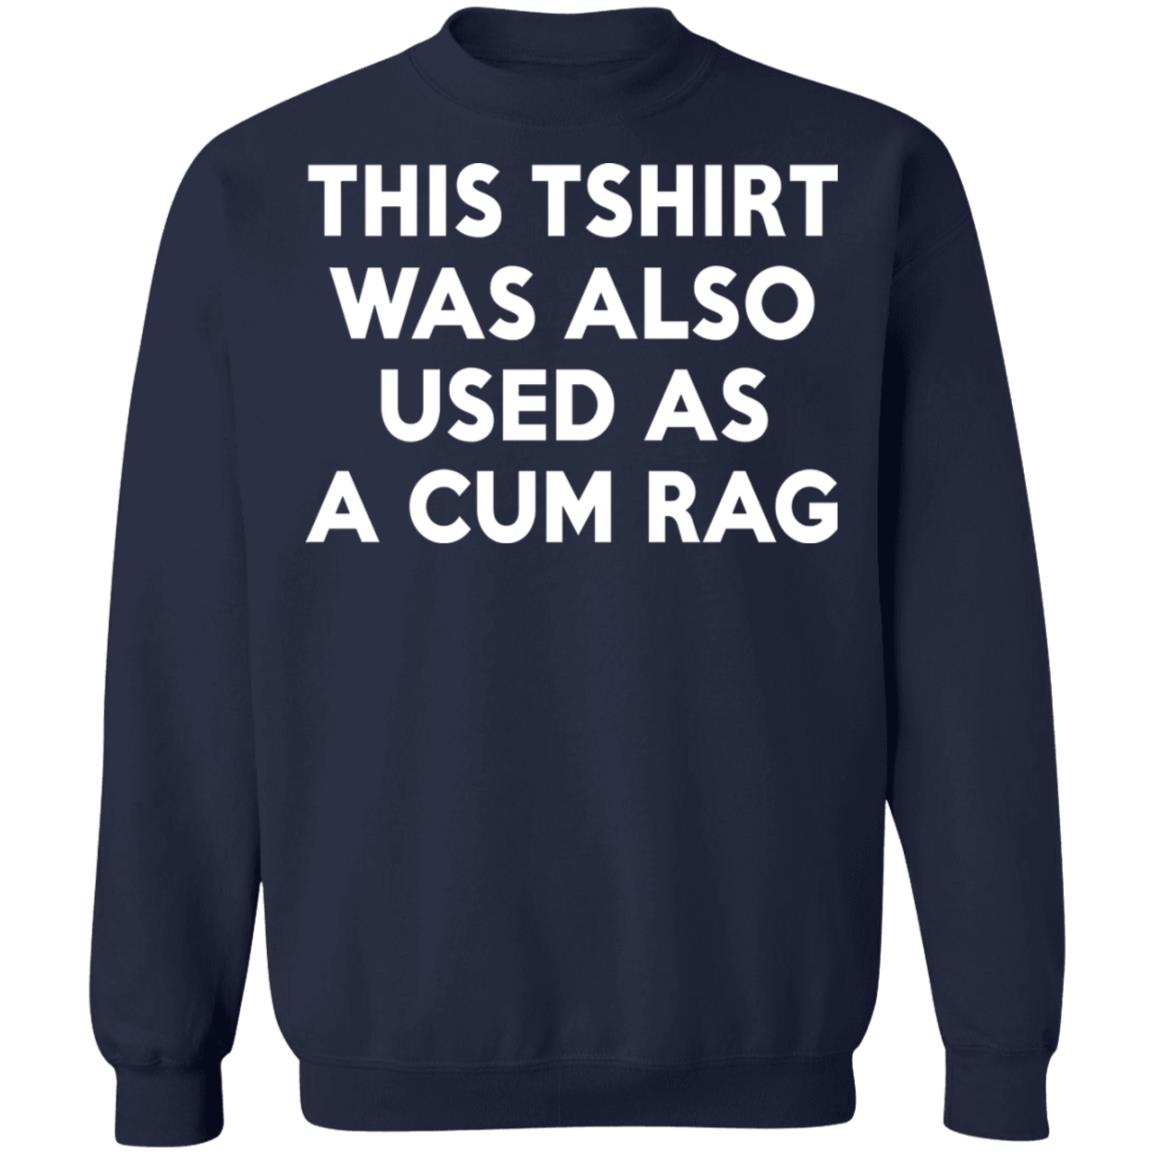 My other shirt is a cum rag shirt, hoodie, sweater, longsleeve and V-neck  T-shirt